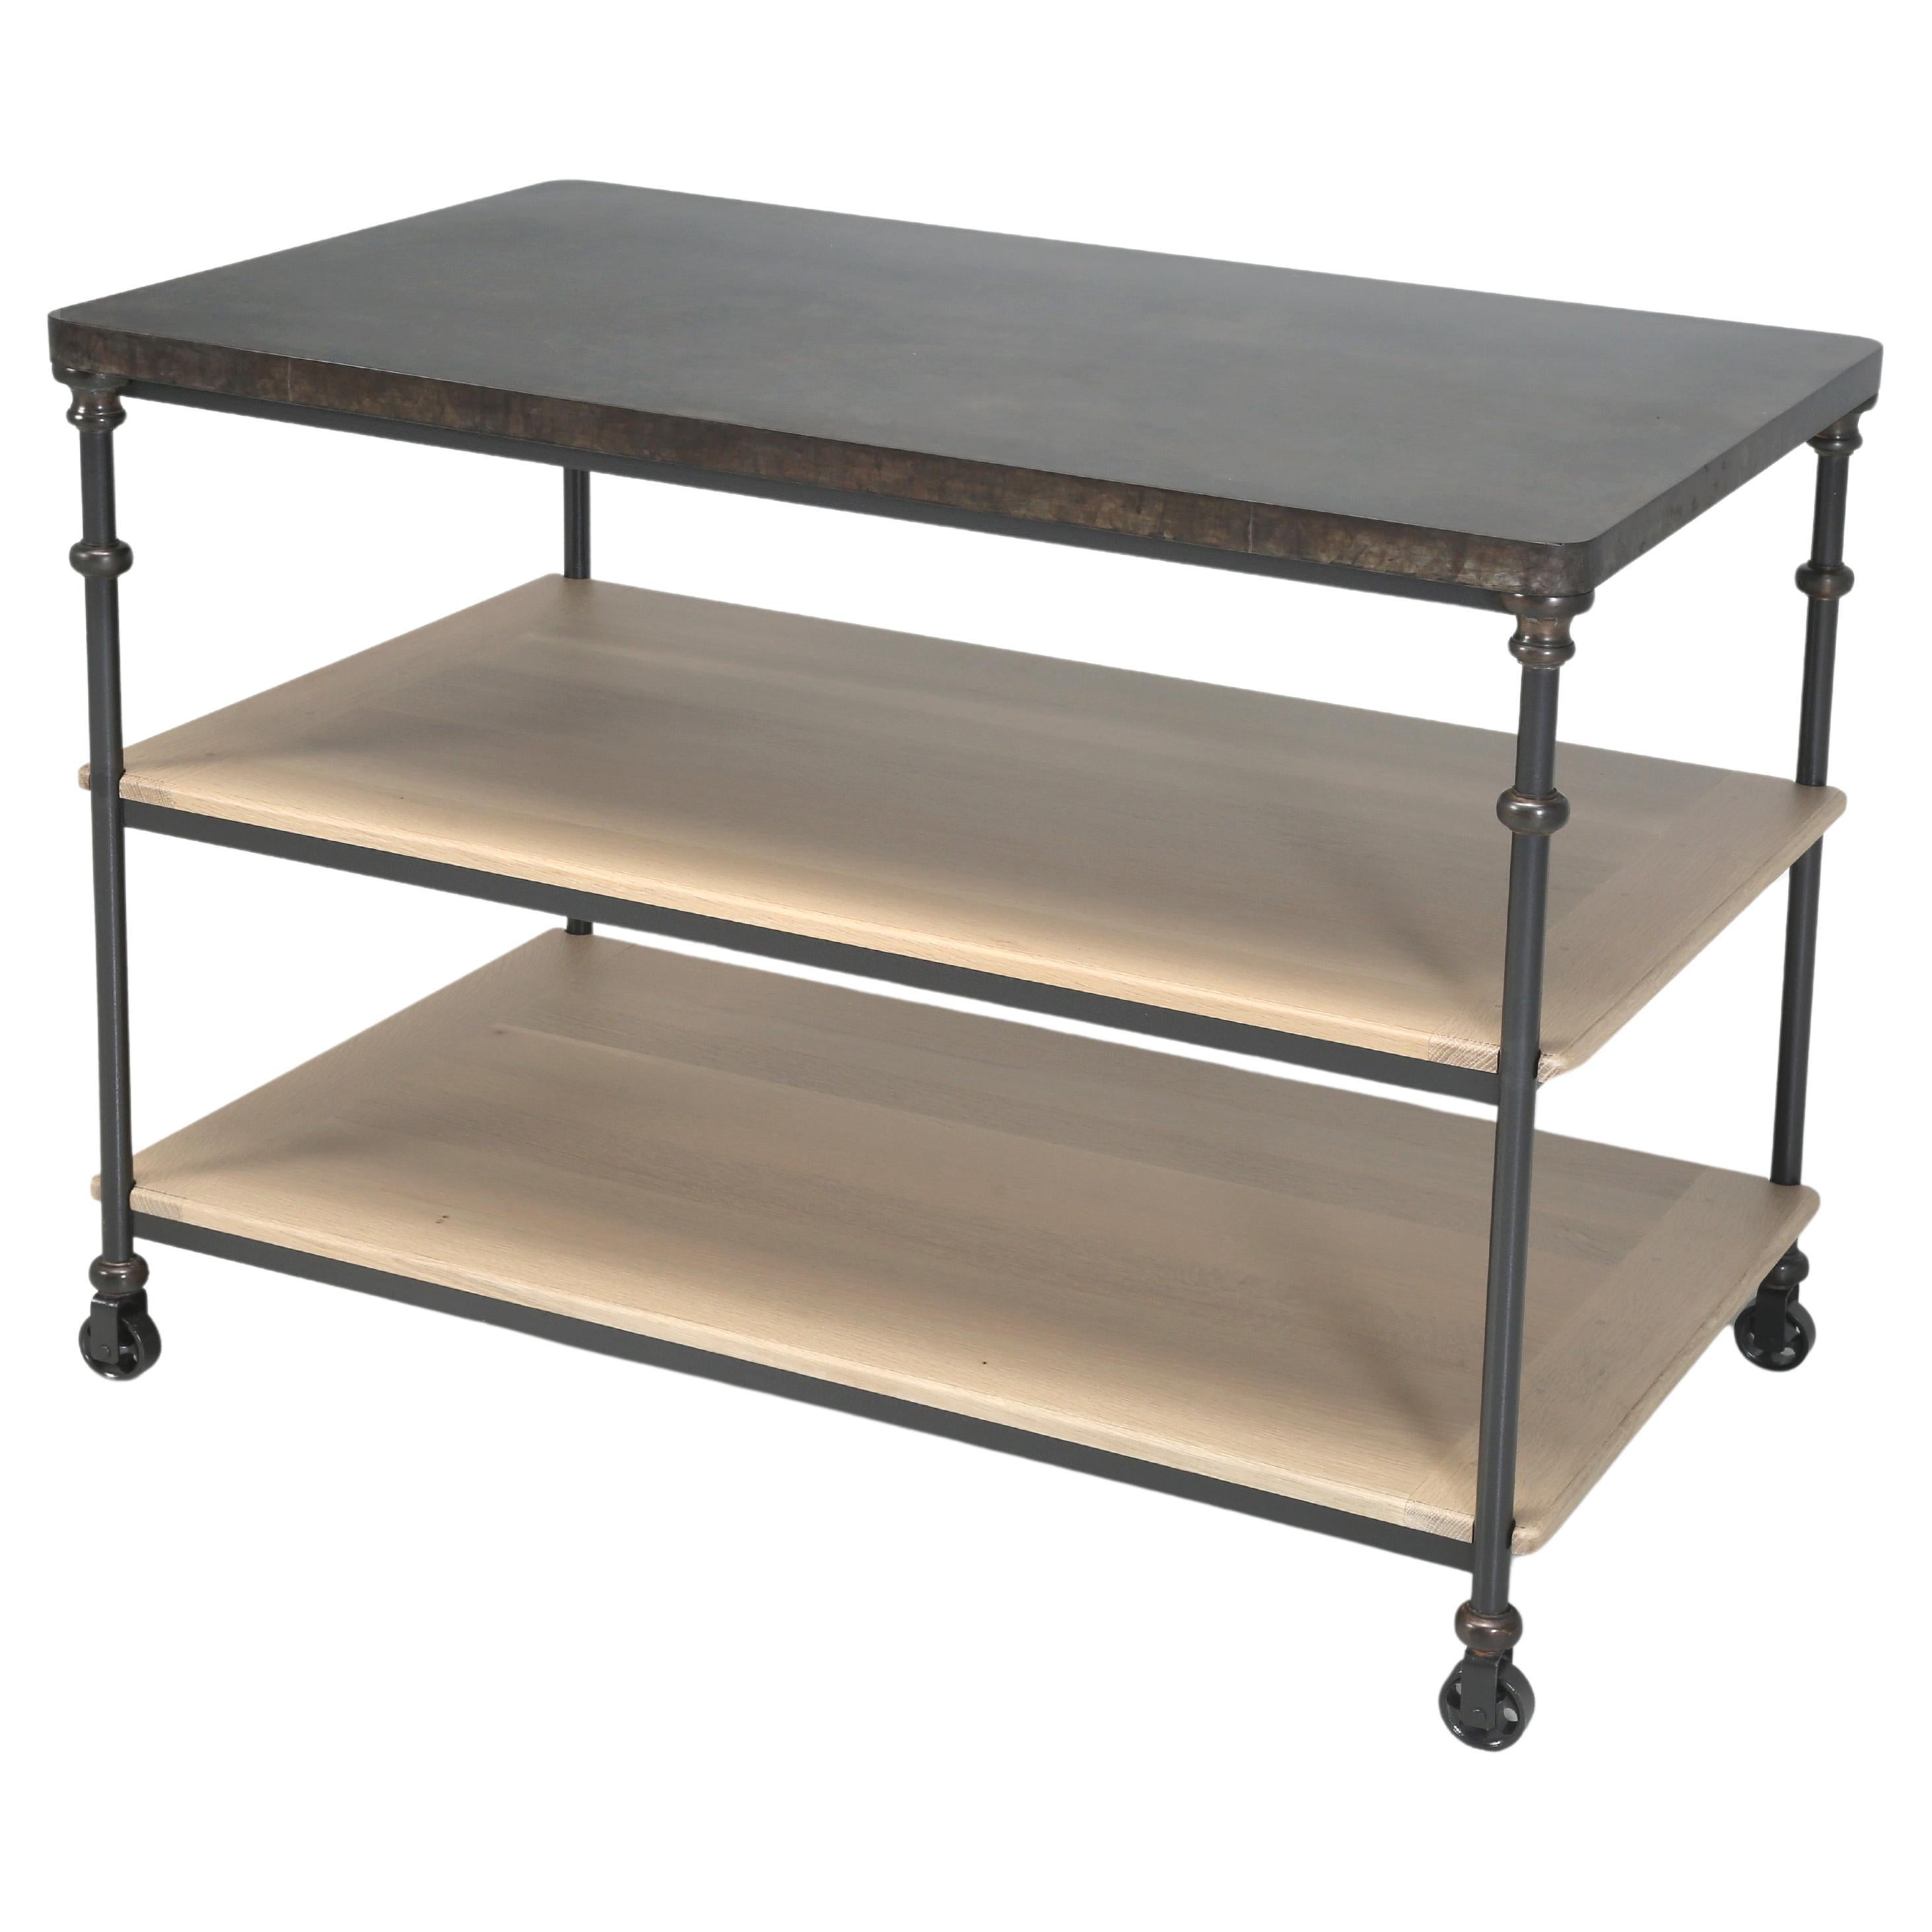 French Industrial Style Kitchen Island Zinc, Bronze, Steel by Old Plank Any Size